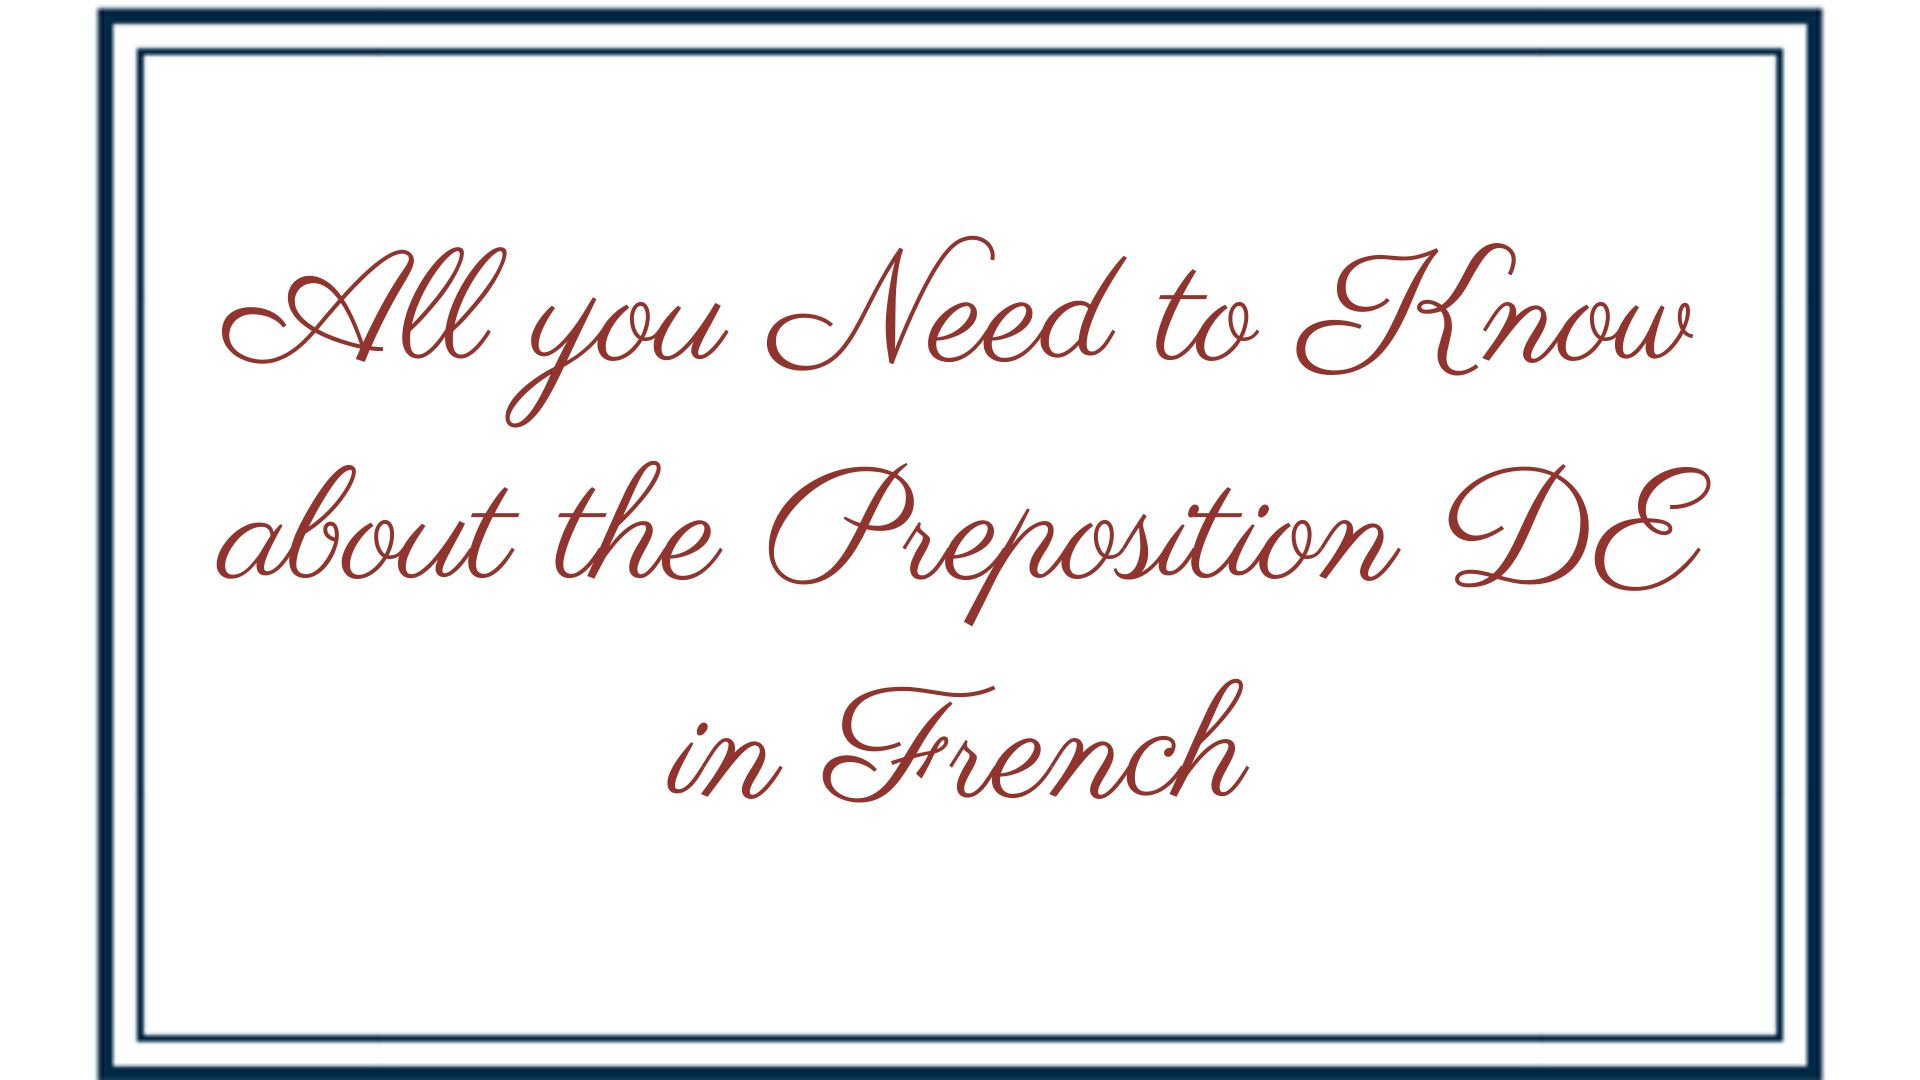 All you Need to Know about the Preposition DE in French